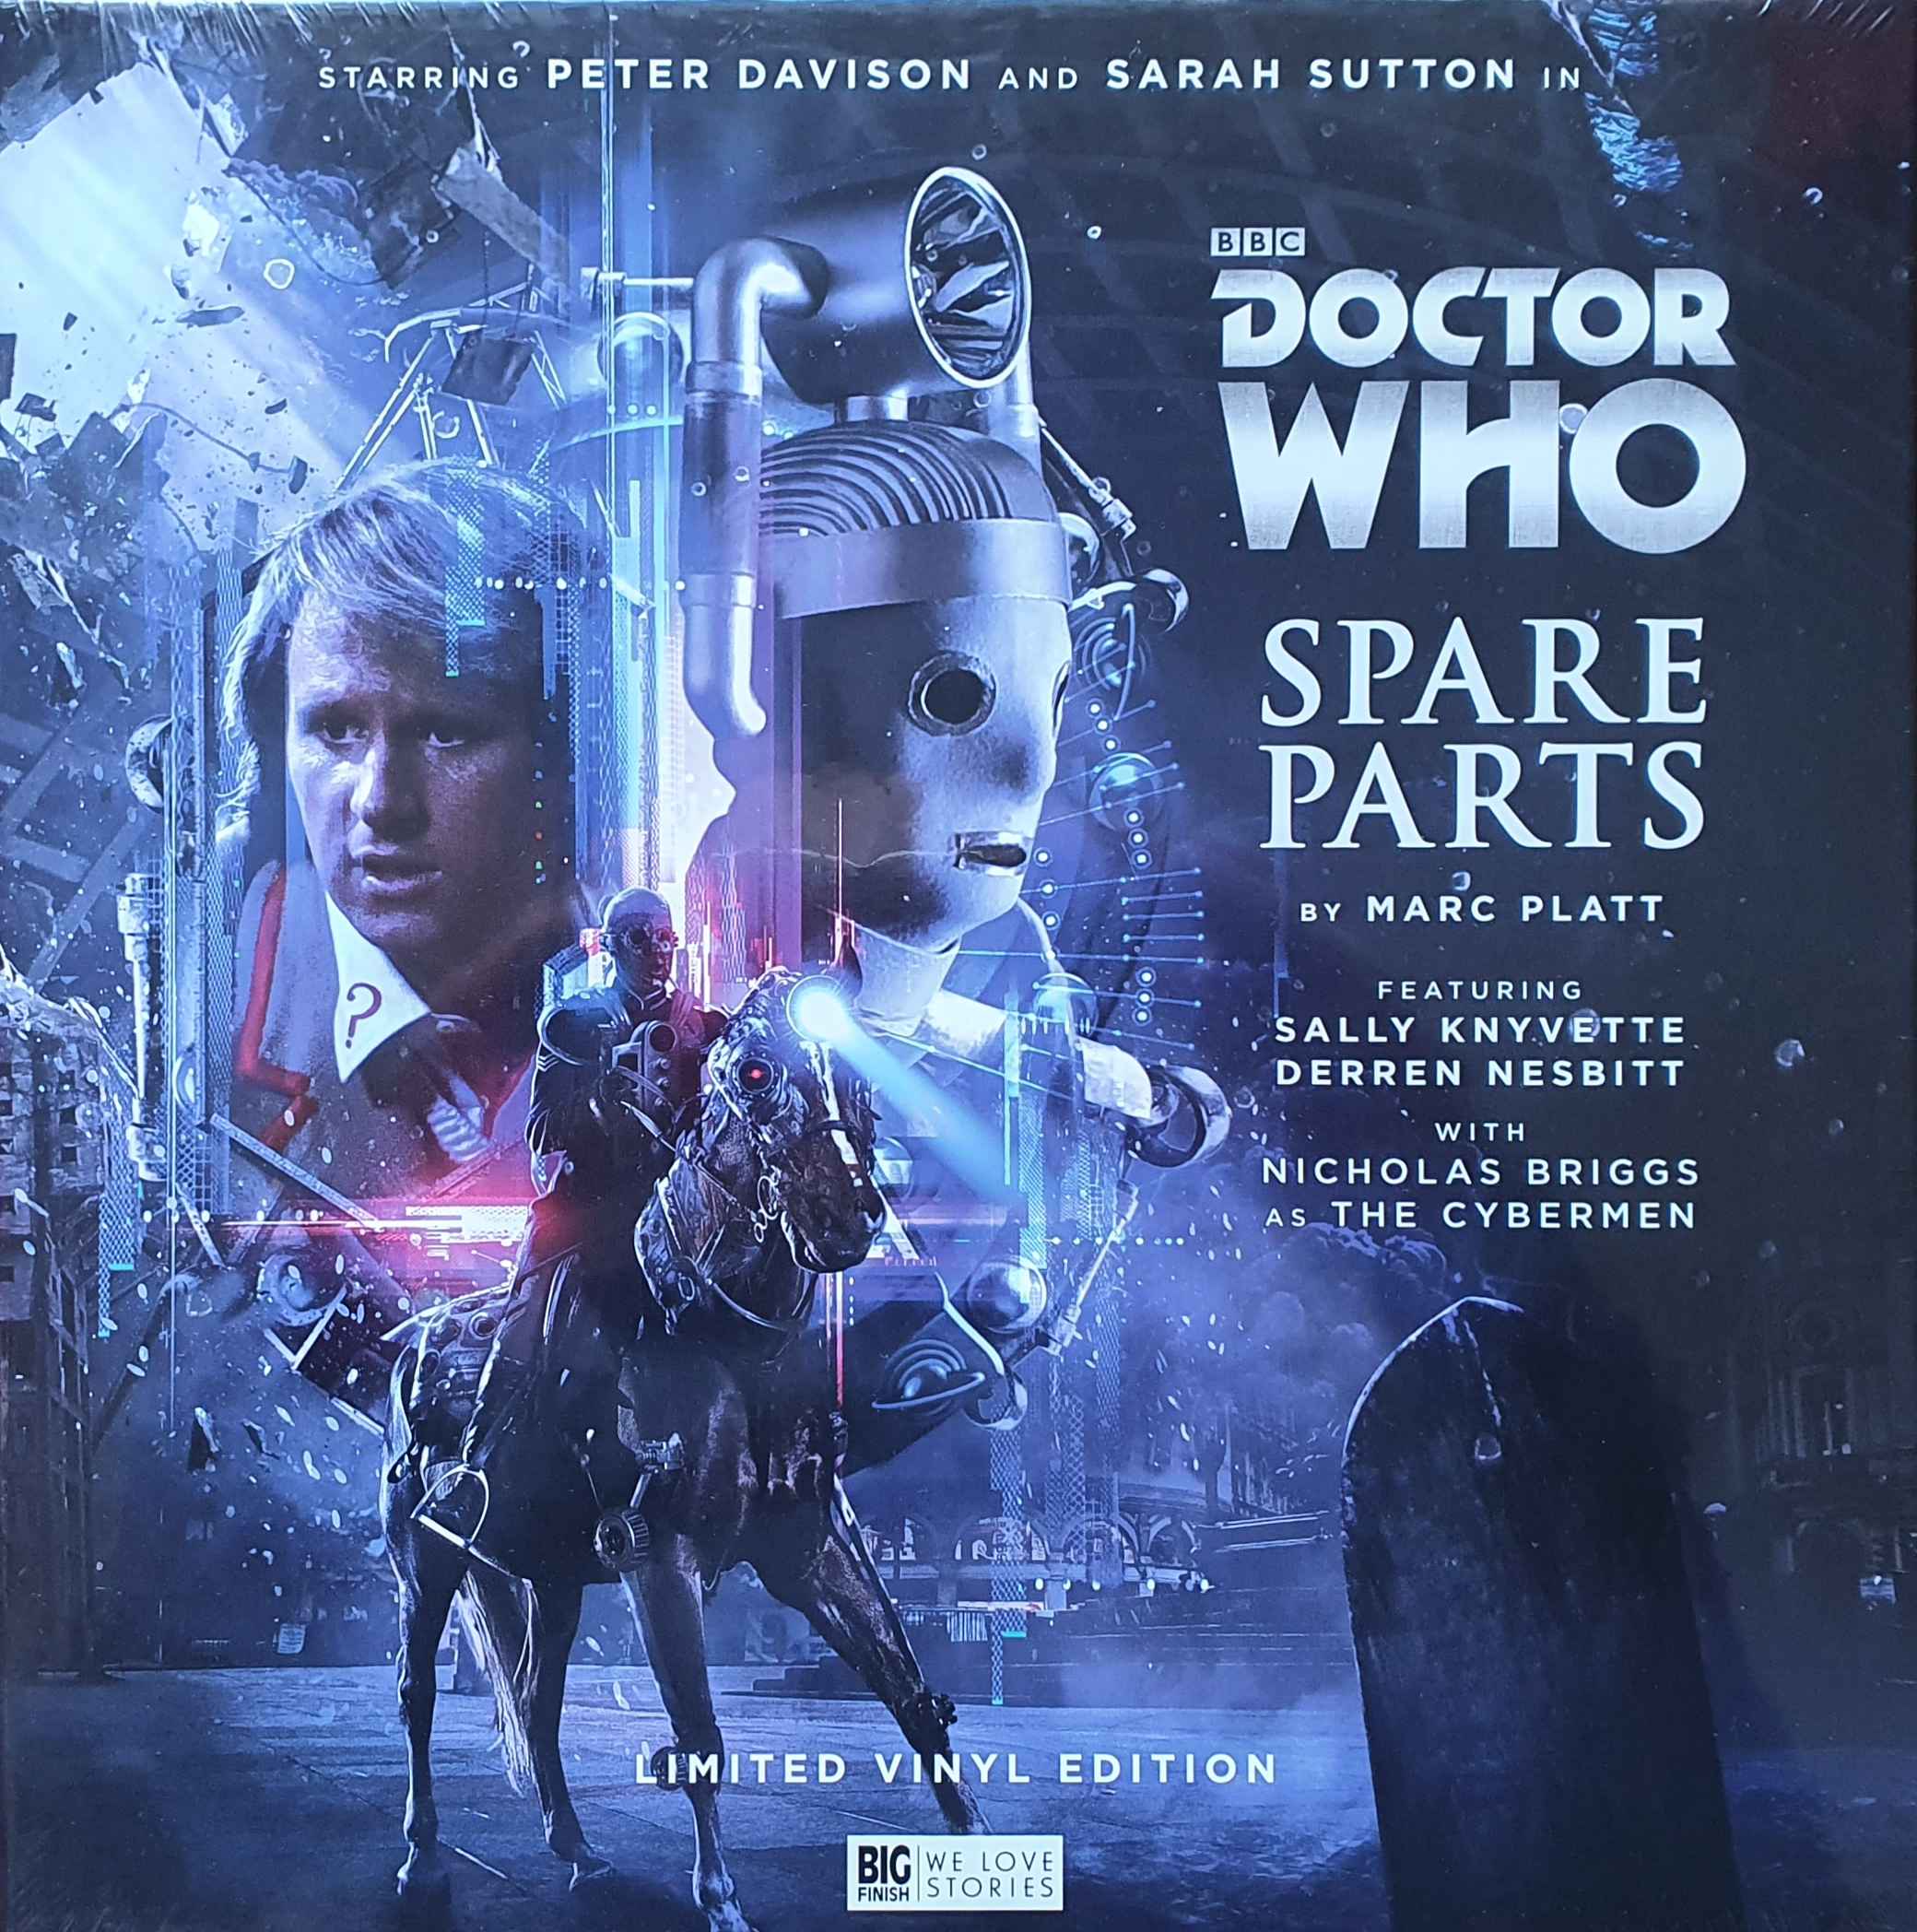 Picture of BFPDWCD6CELP Doctor Who - Spare parts by artist Marc Platt from the BBC records and Tapes library